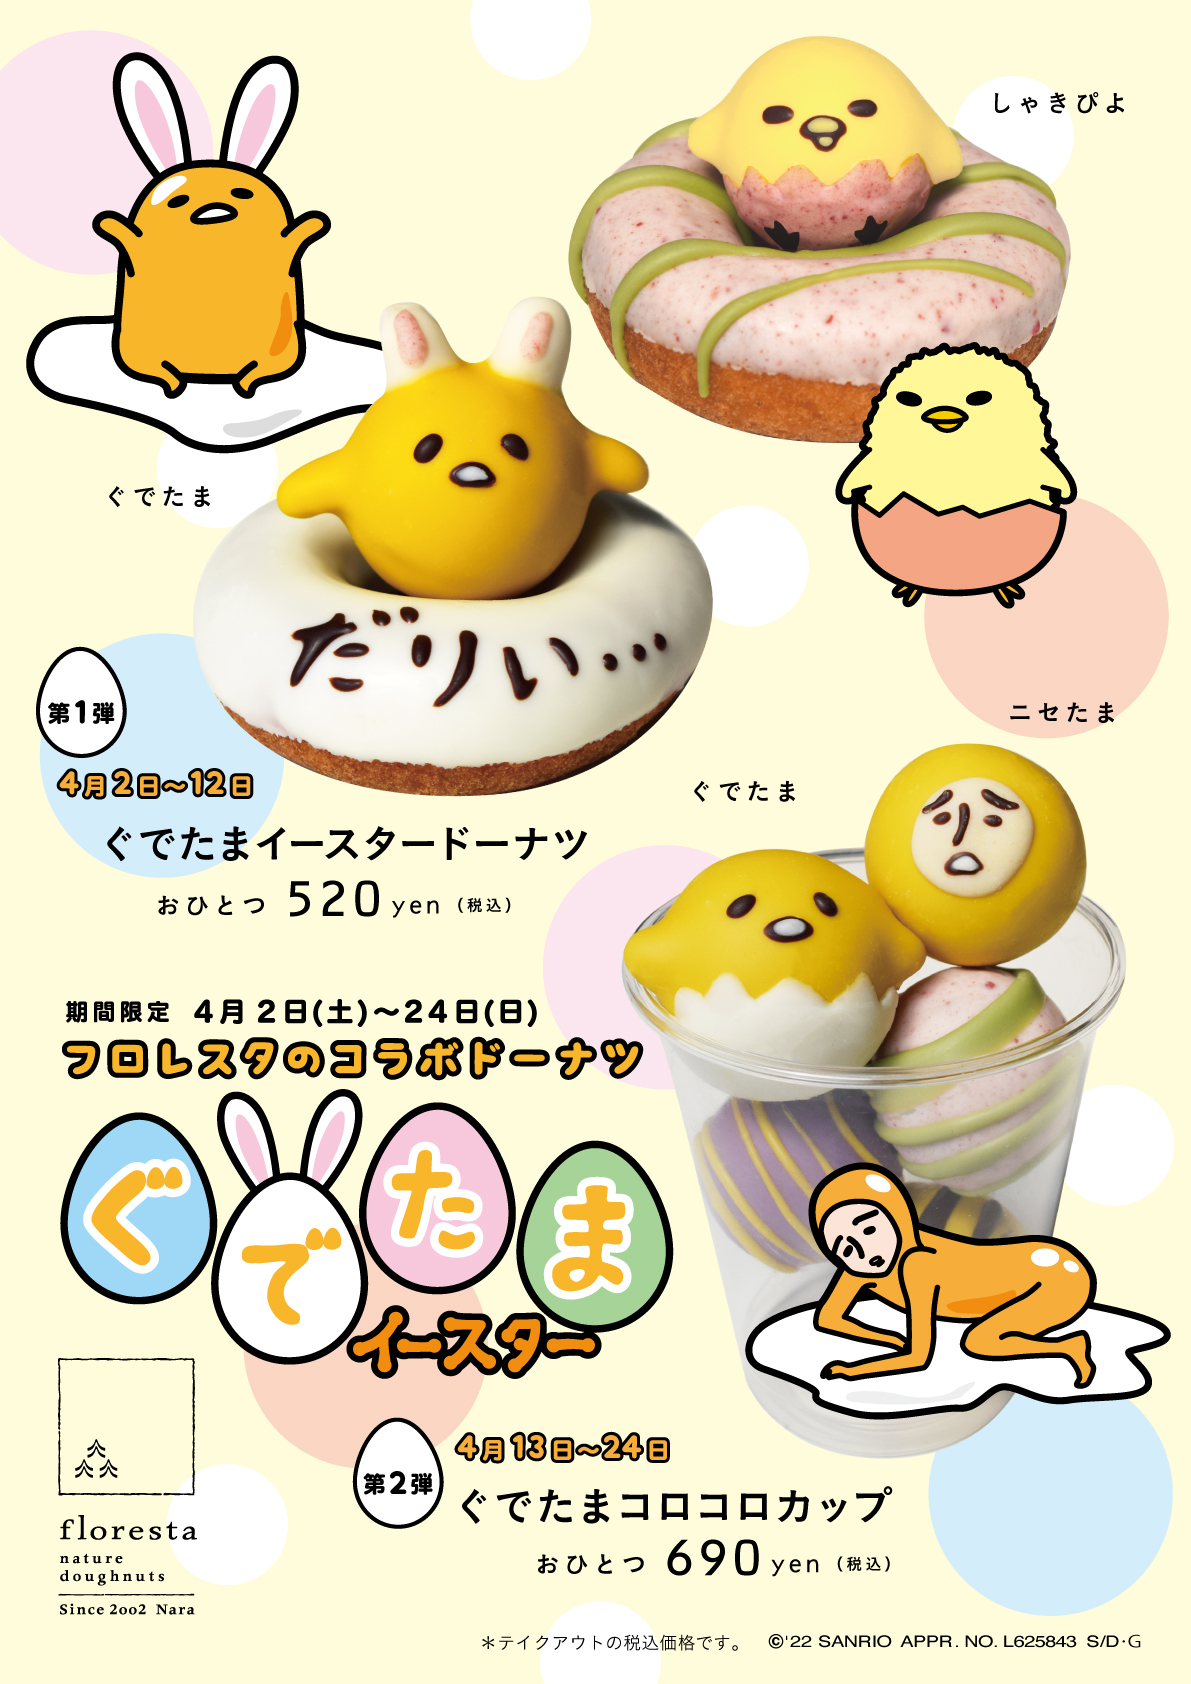 Details about   ❤ JAPAN Sanrio STORE LIMITED Easter macaron colored rabbit ears candy cans ❤ 